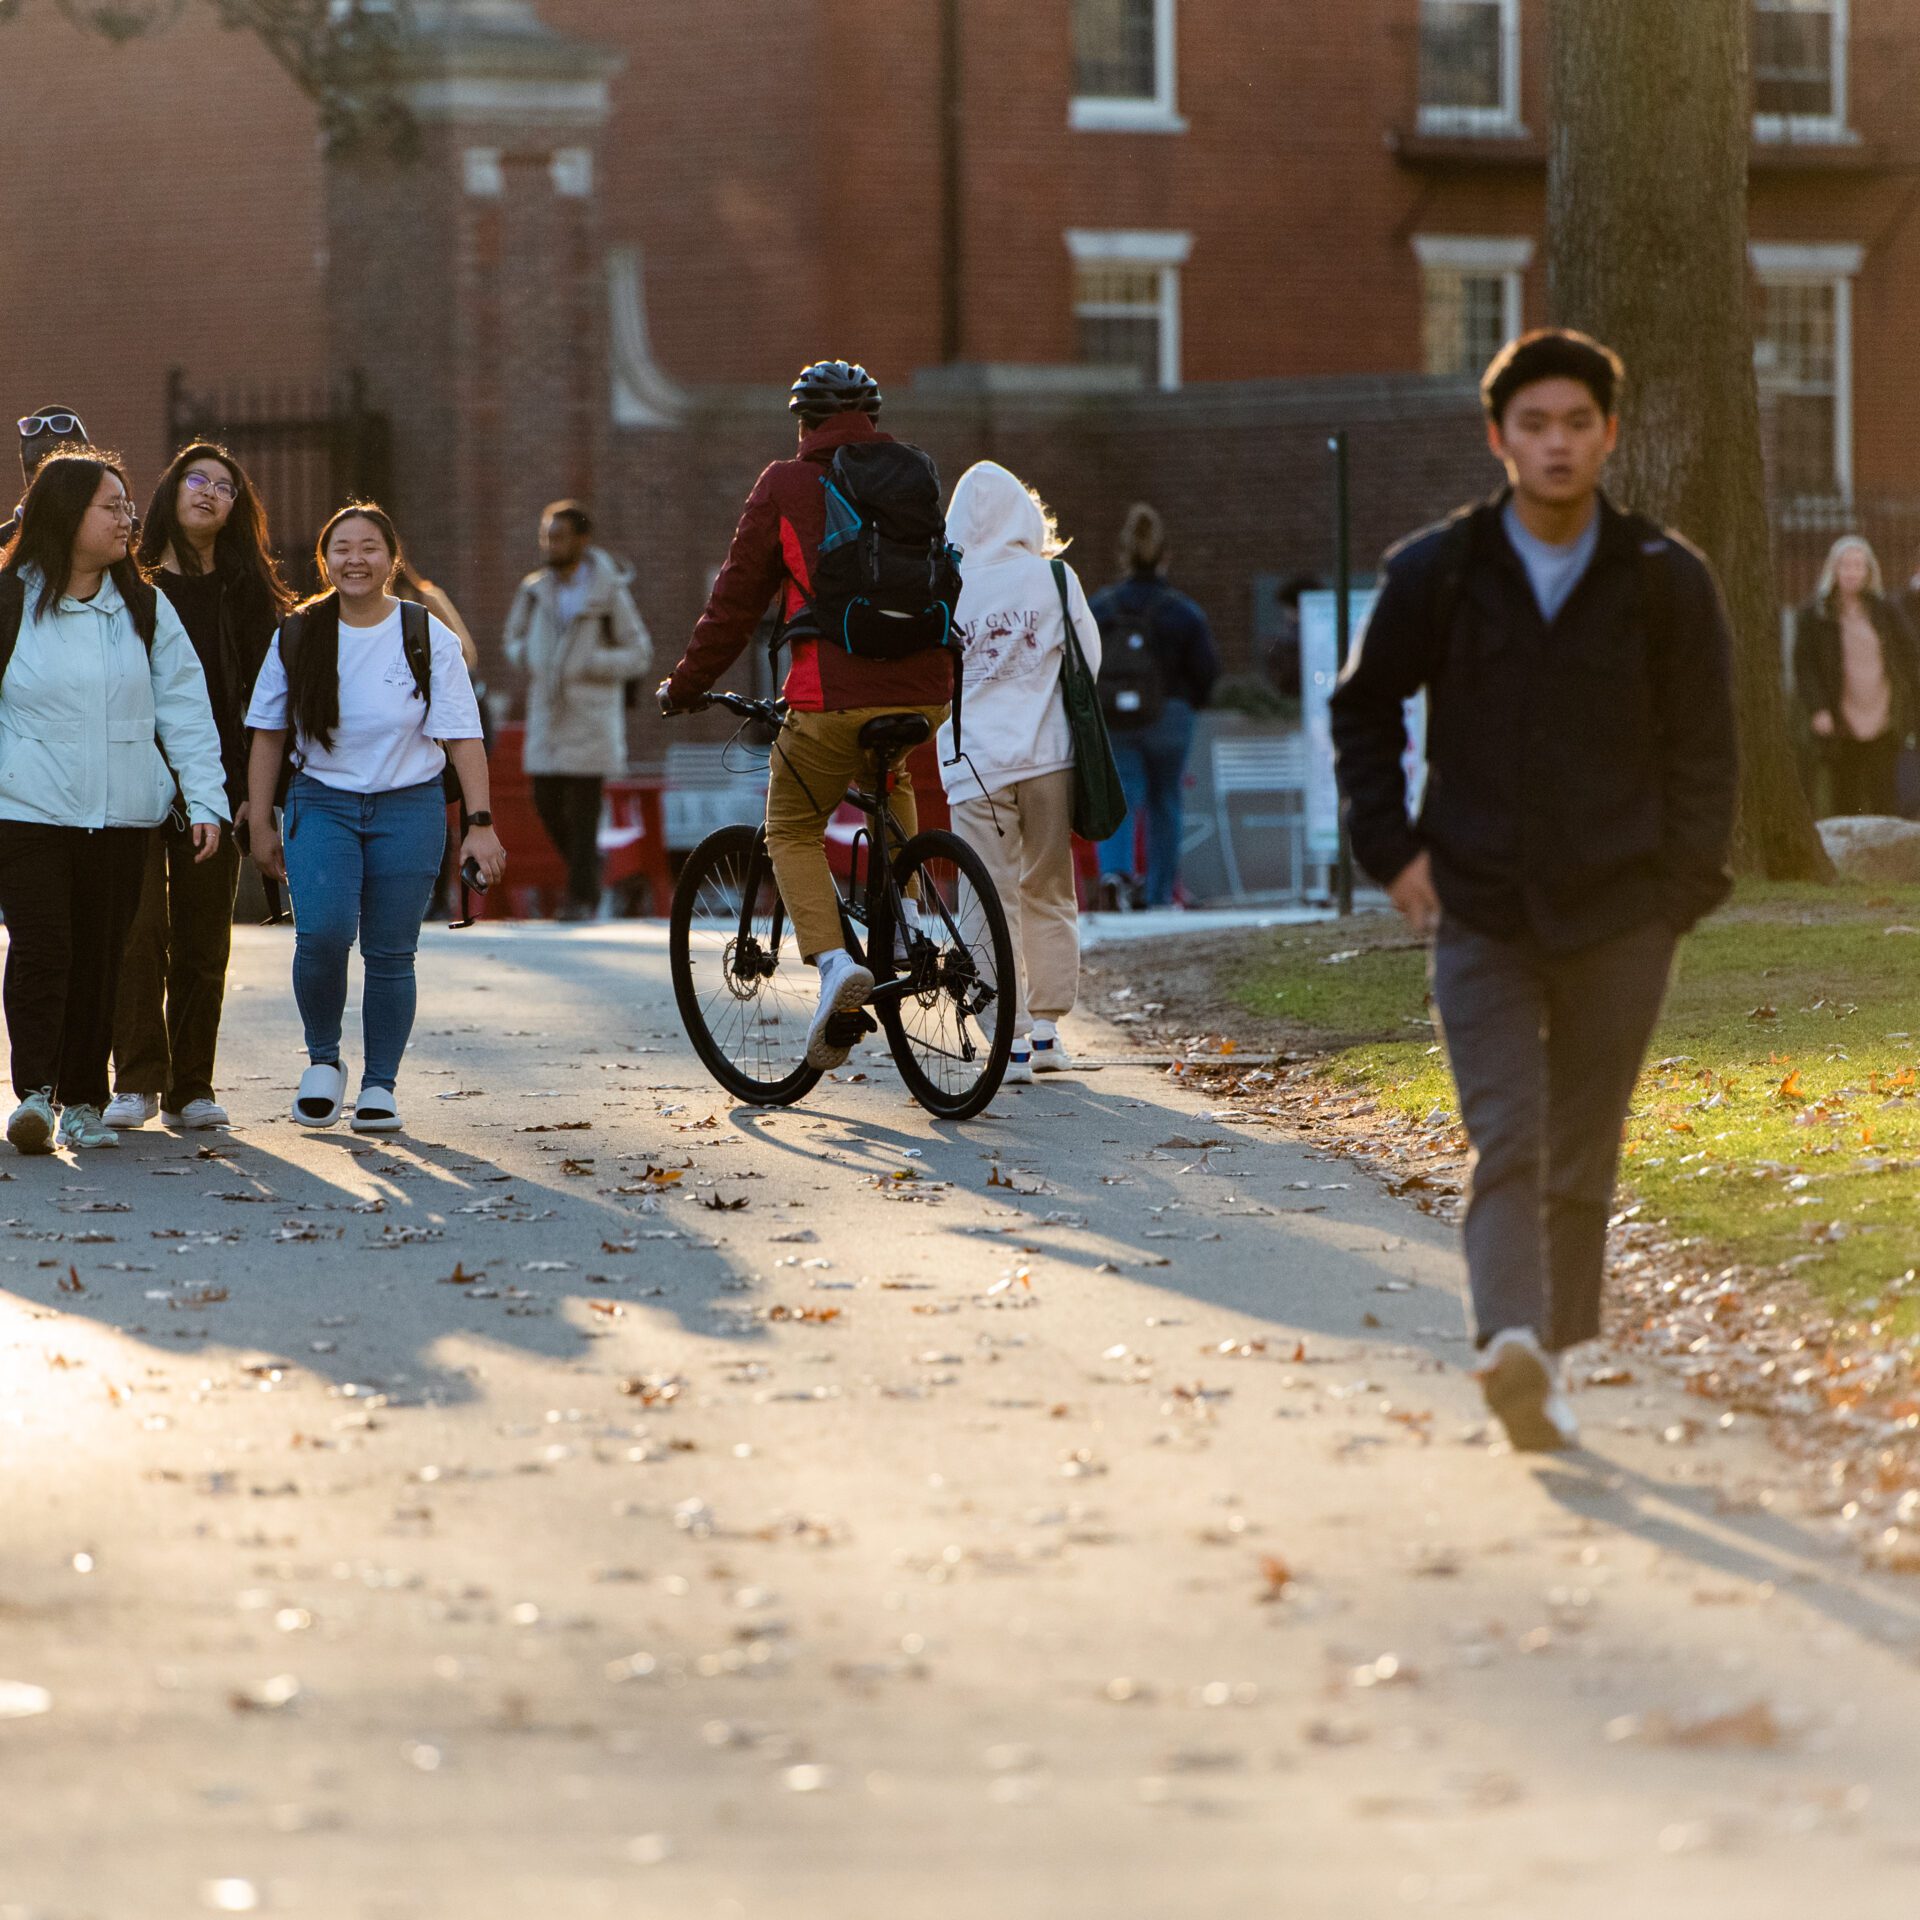 A group of students walking by on a road inside Harvard.